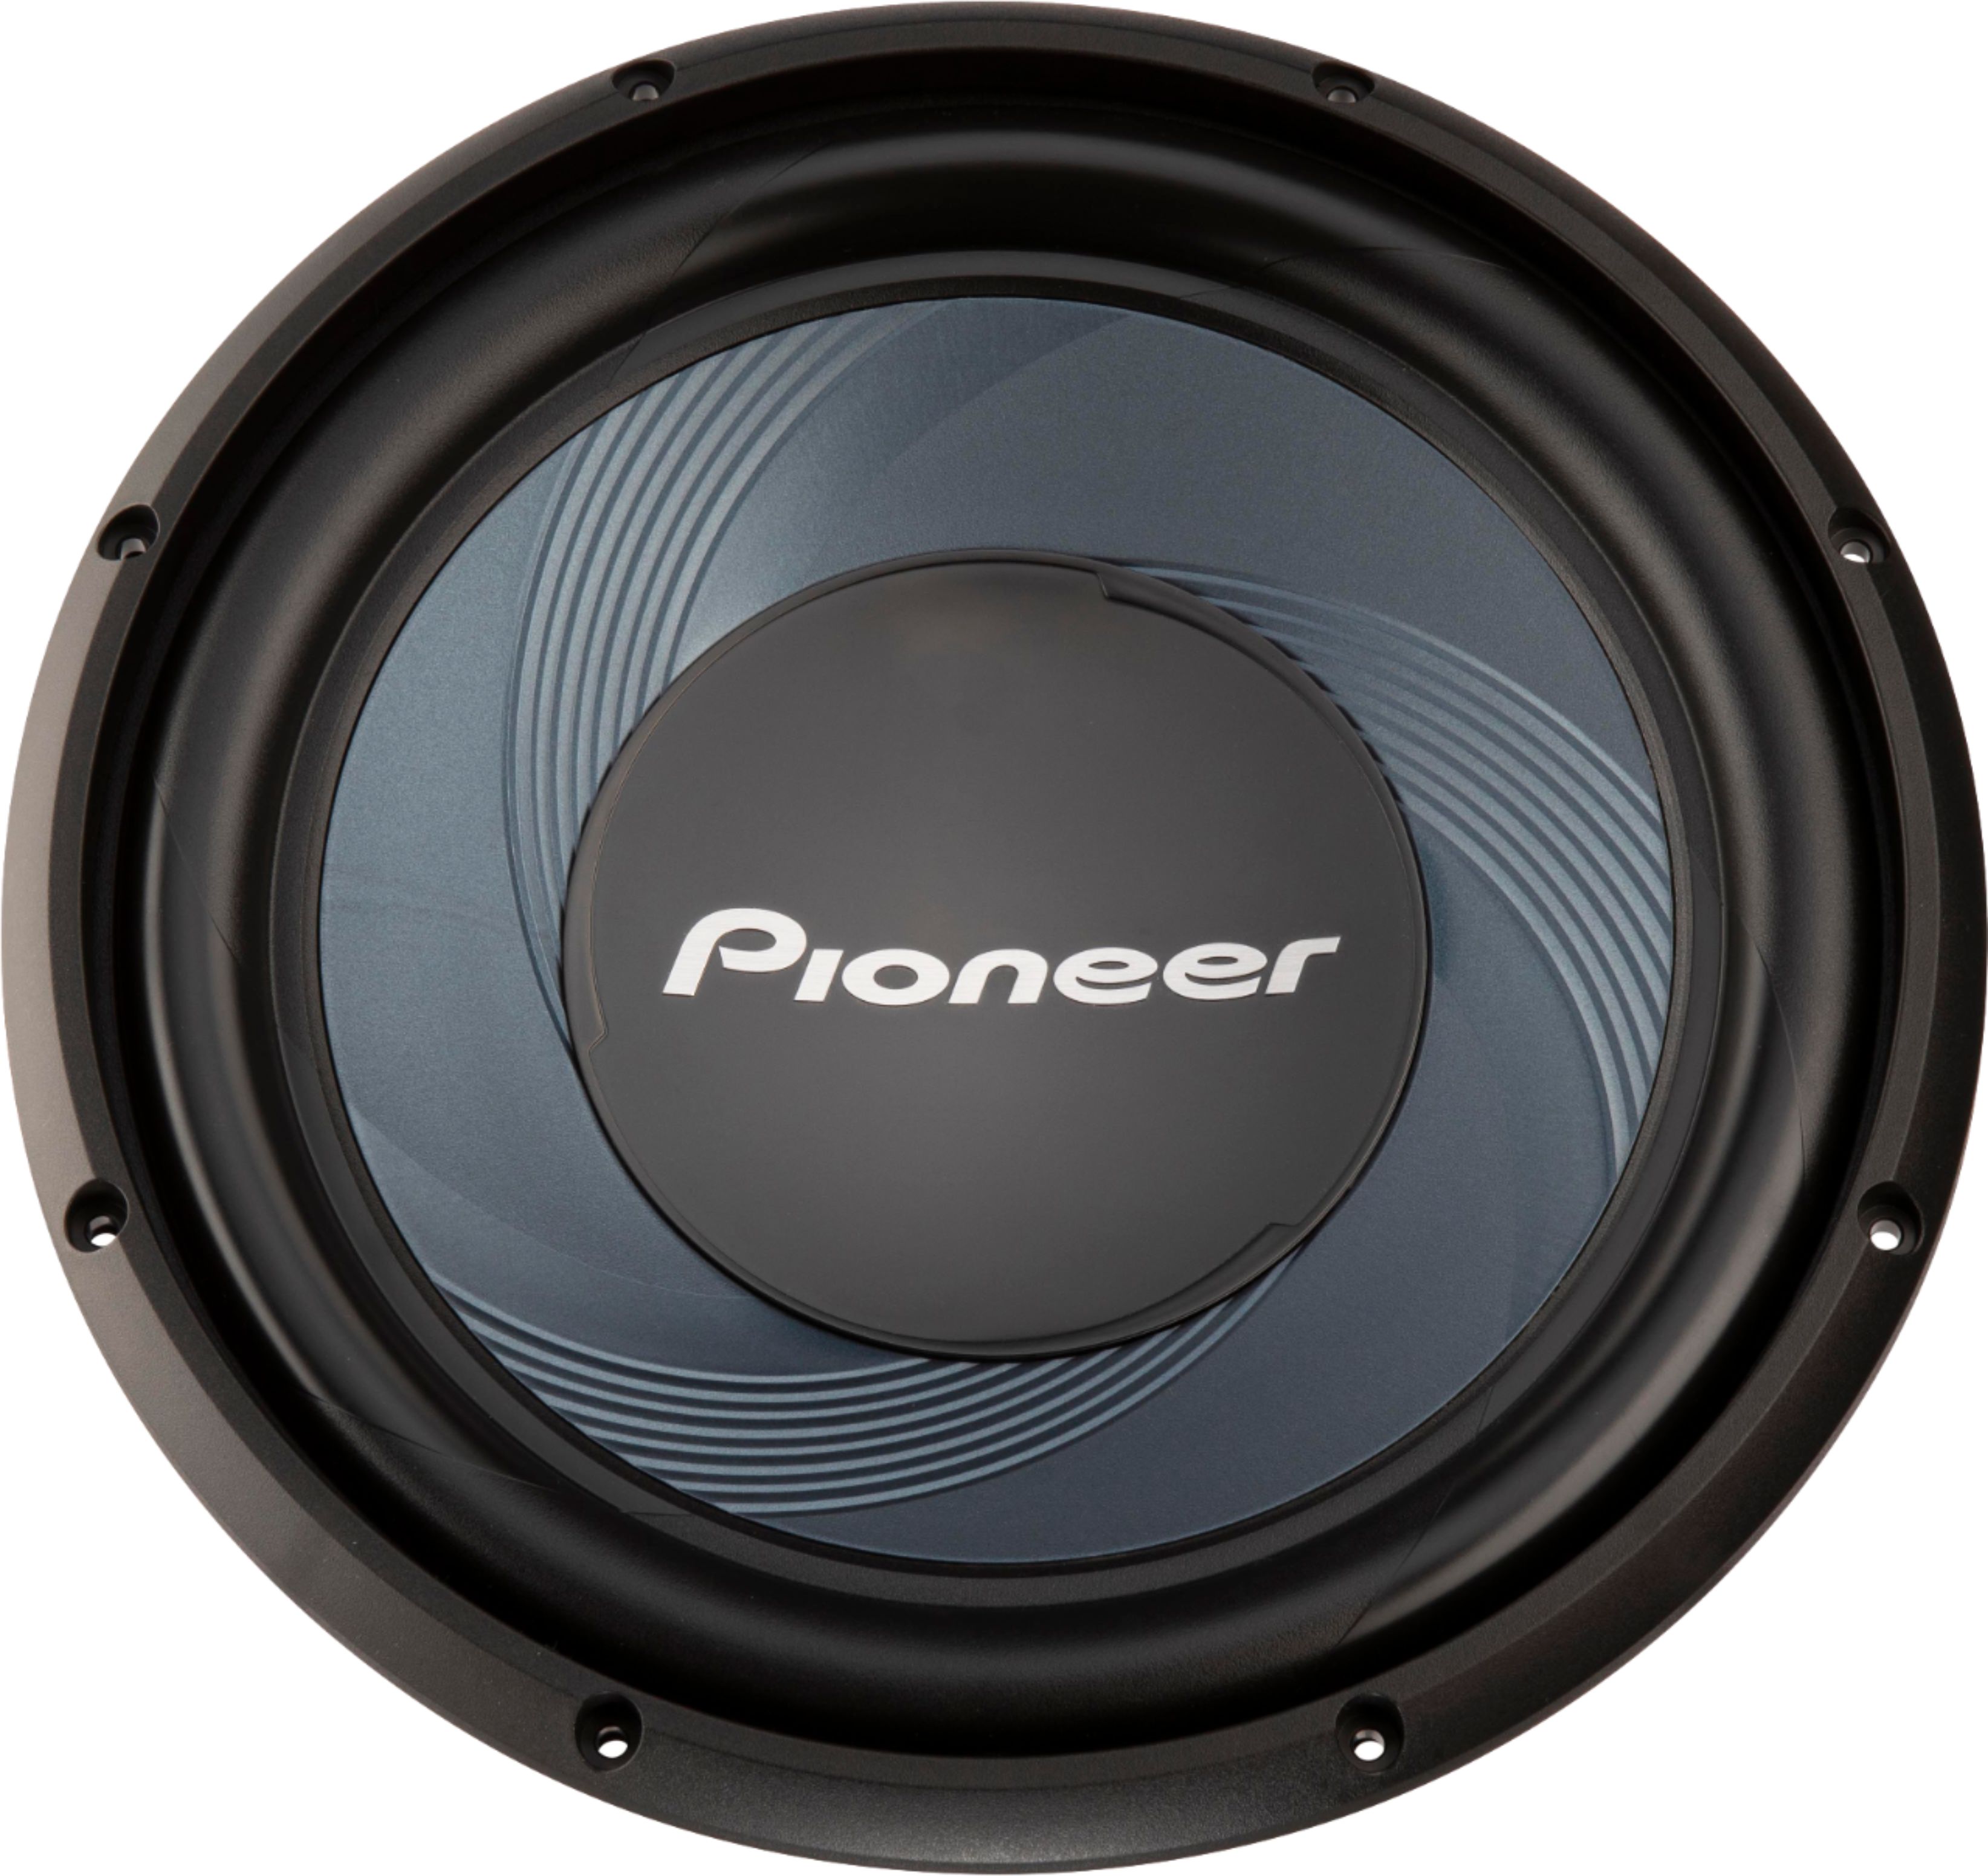 Pioneer - 12" - 1400 W Max Power, Single 4Ω Voice Coil, IMPP™ cone, Rubber Surround - Component Subwoofer - BLUE